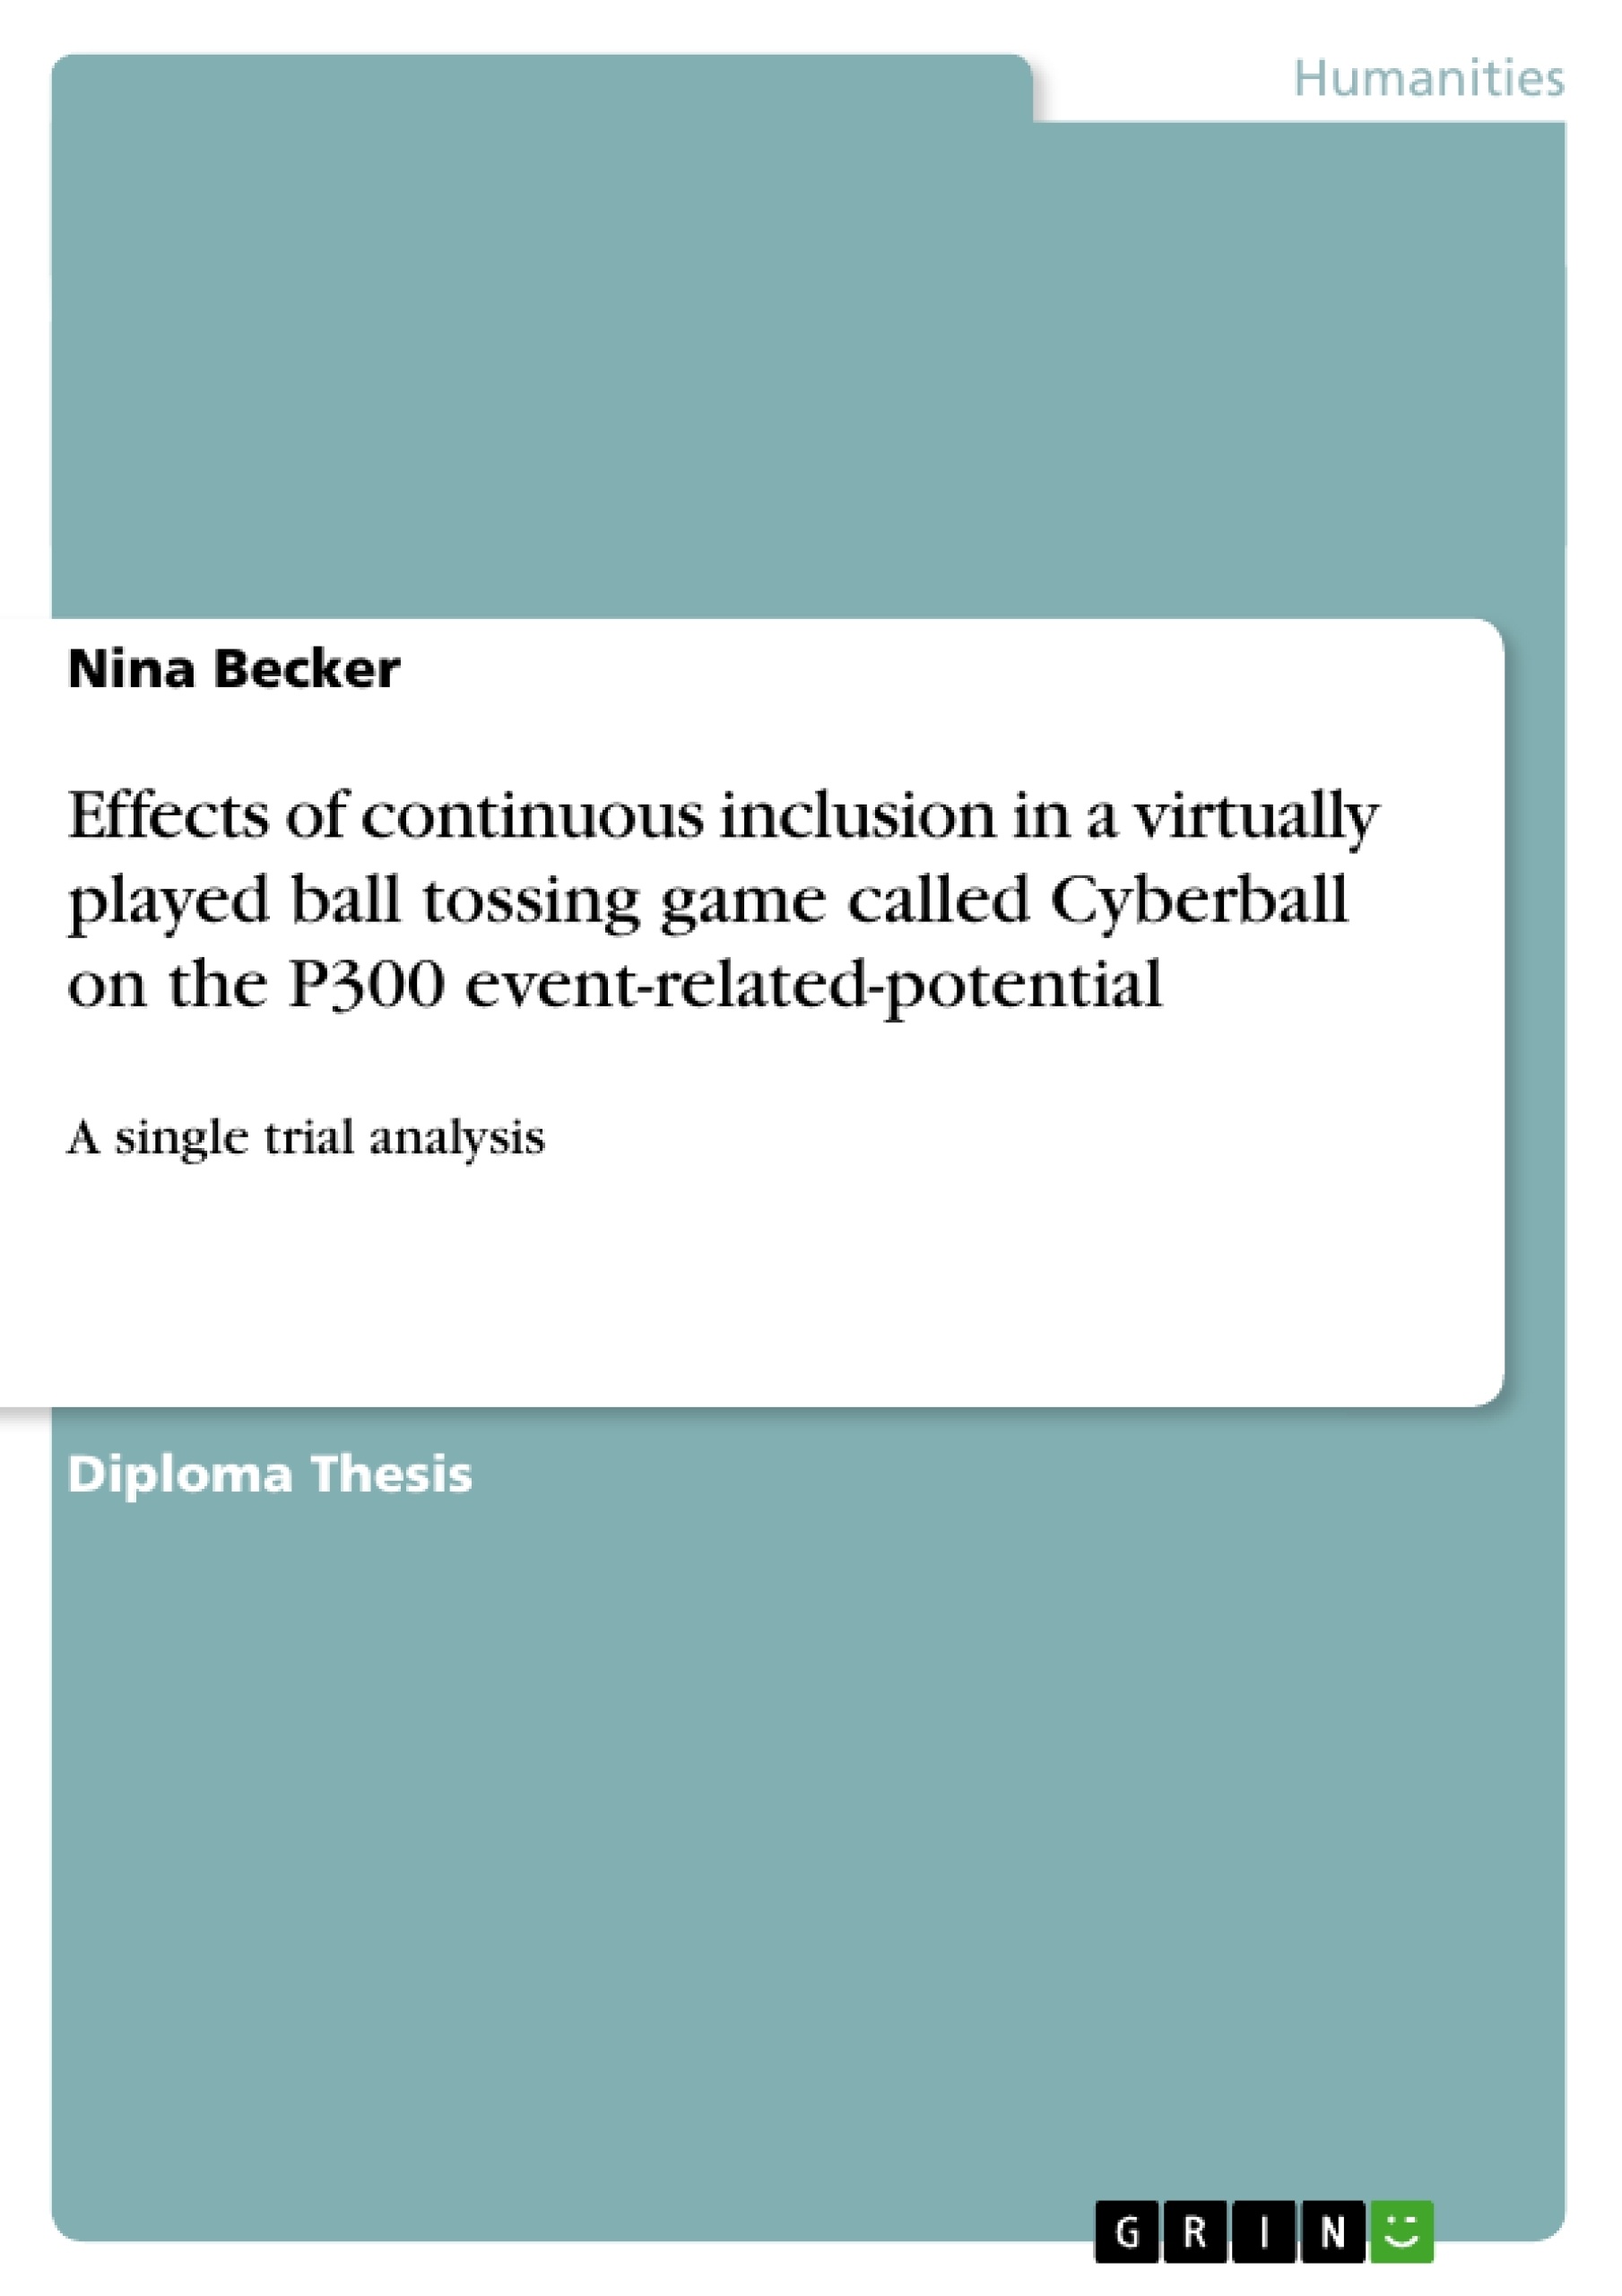 Título: Effects of continuous inclusion in a virtually played ball tossing game called Cyberball on the P300 event-related-potential